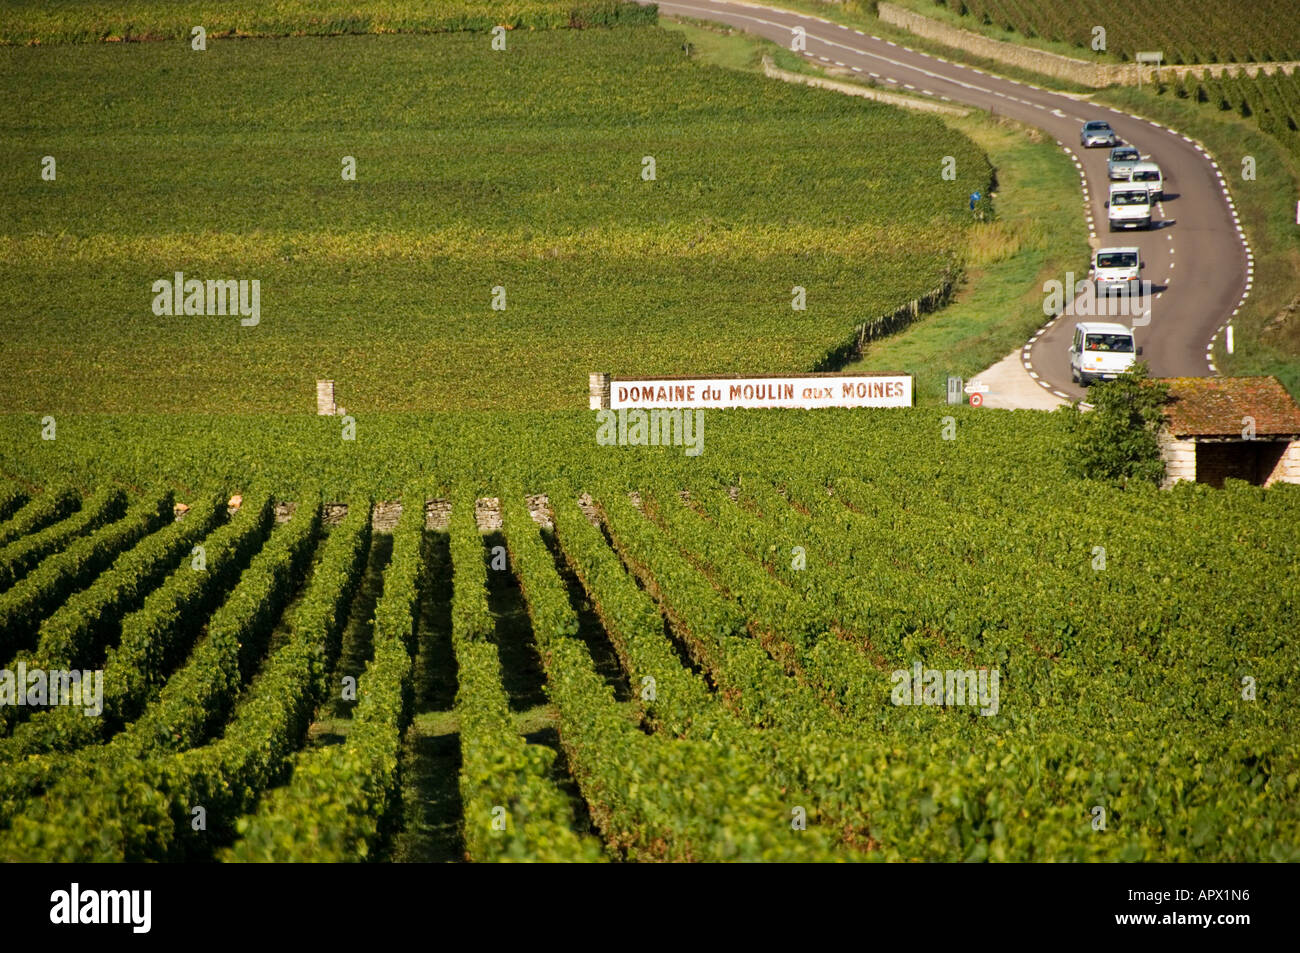 Vineyard at Meursault with the N73 road heading towards Auxey Duresses, Burgundy, France Stock Photo